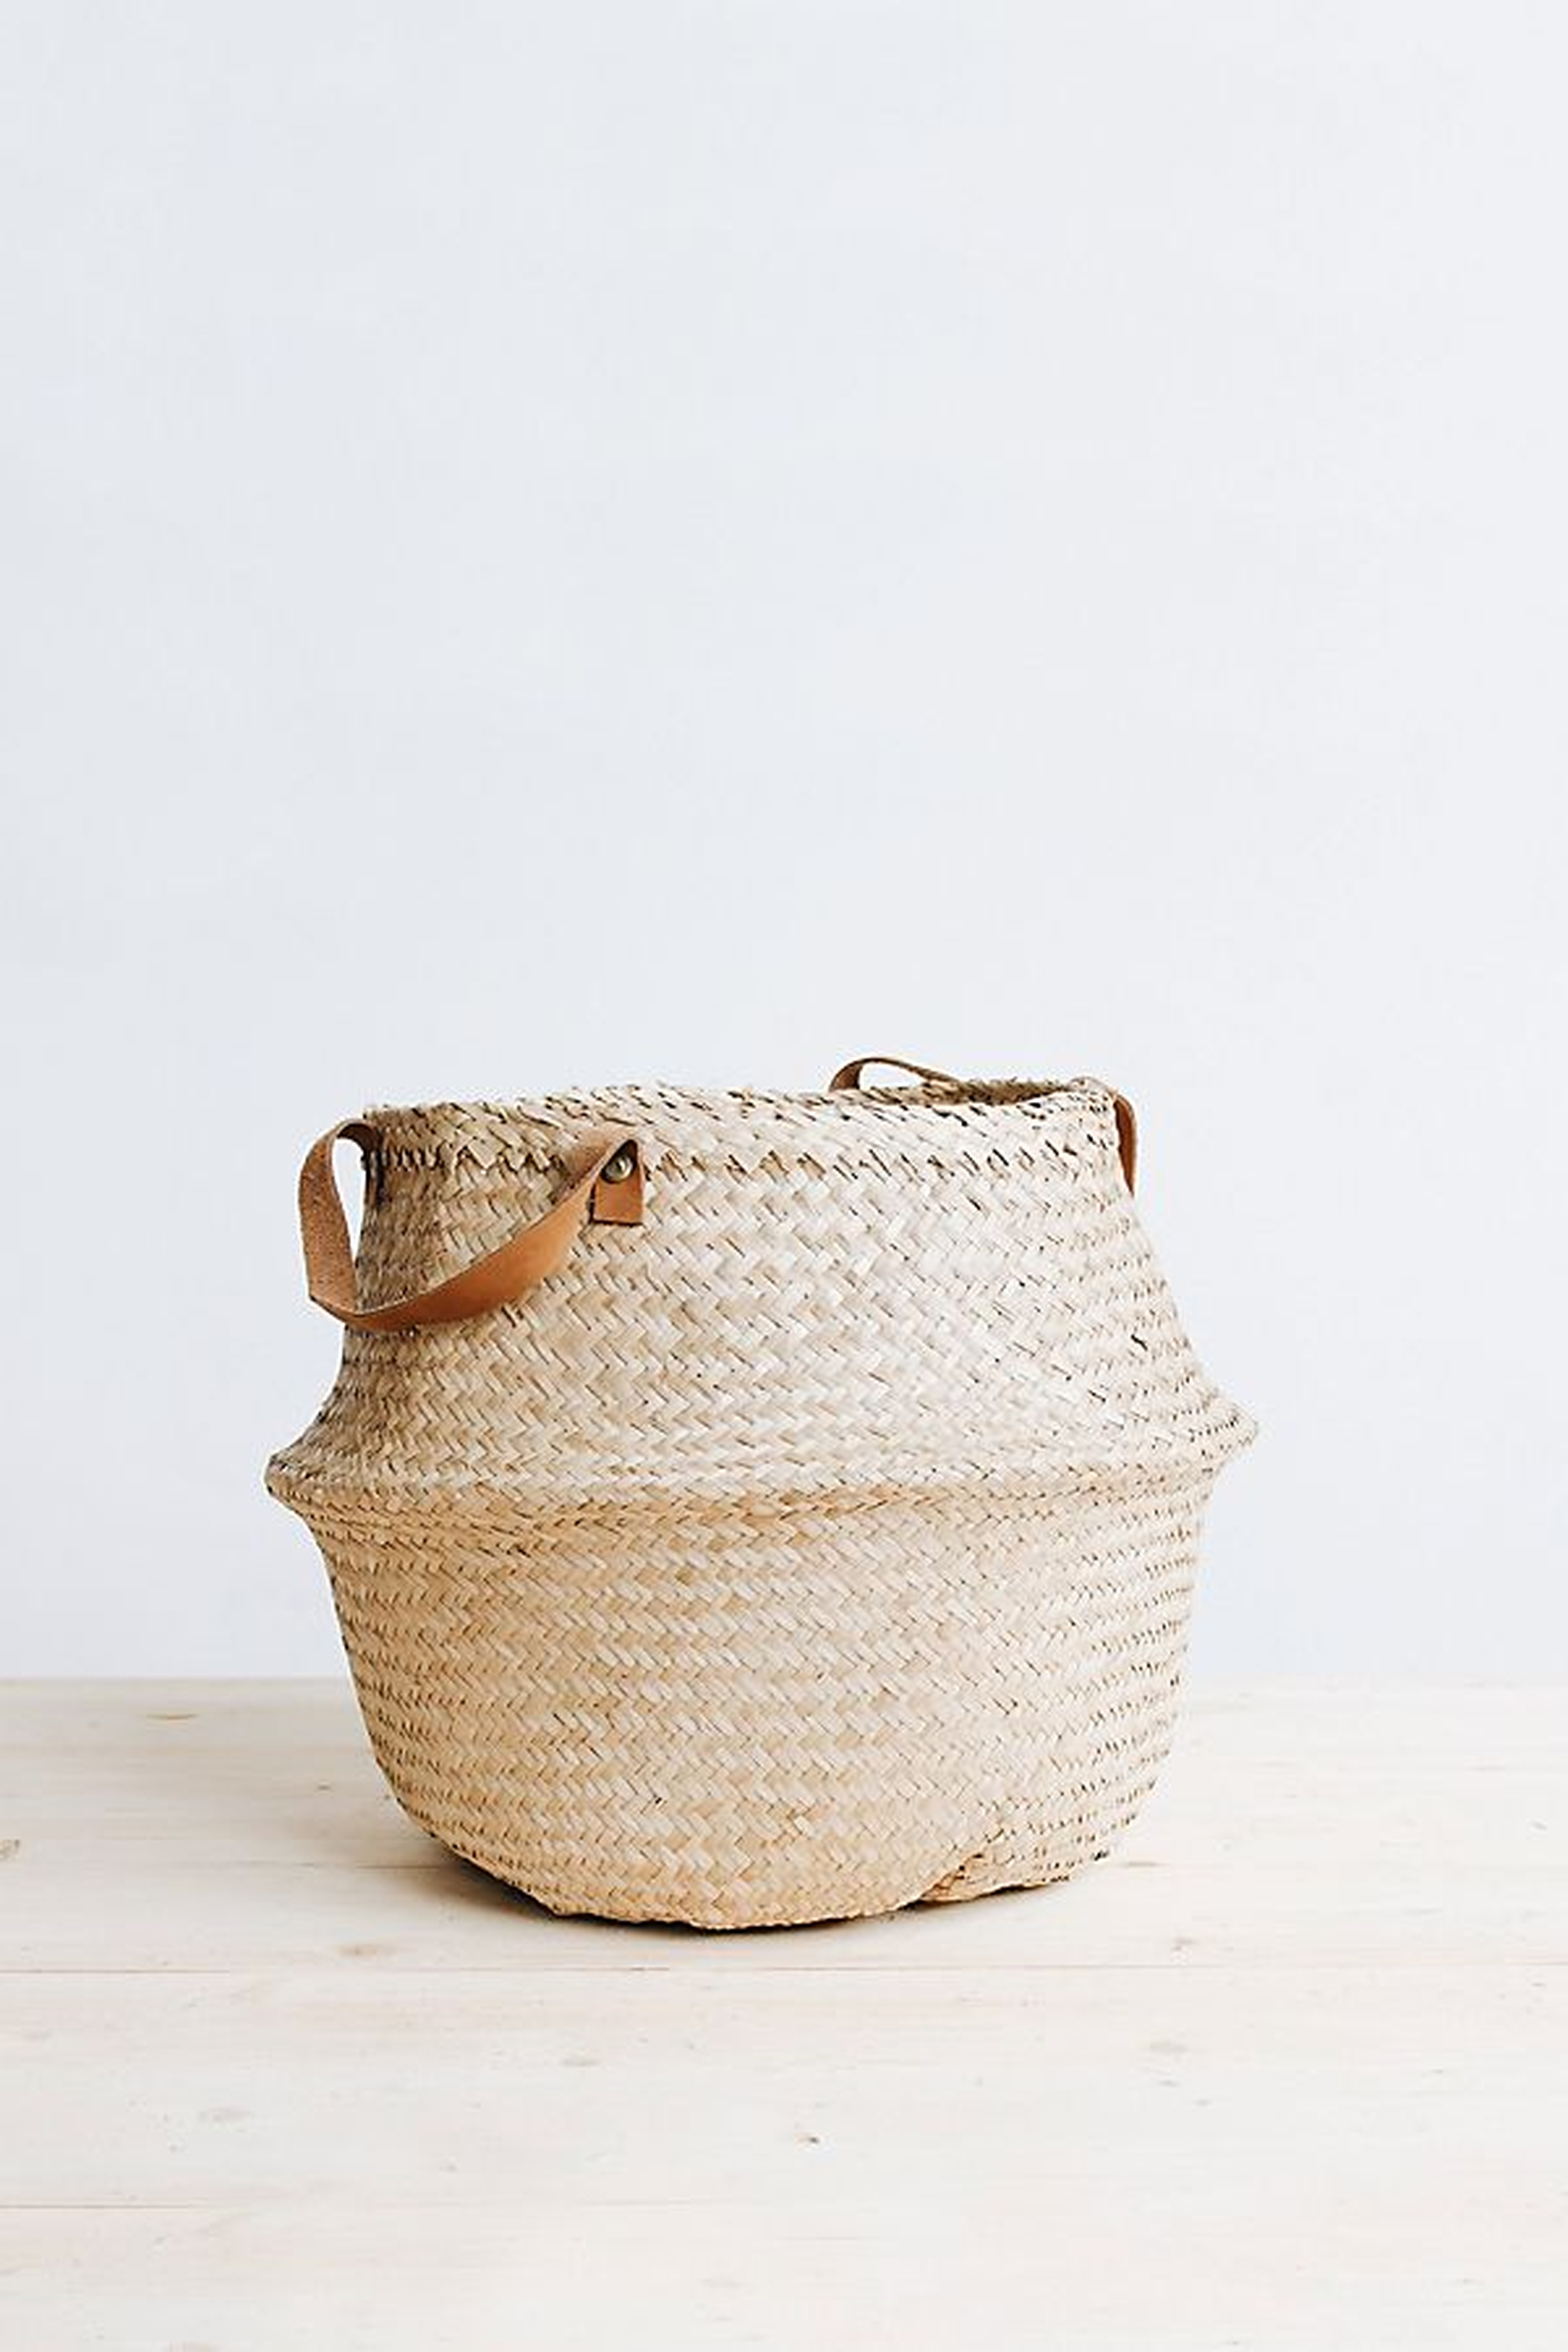 Connected Goods Quinn Belly Basket - Anthropologie